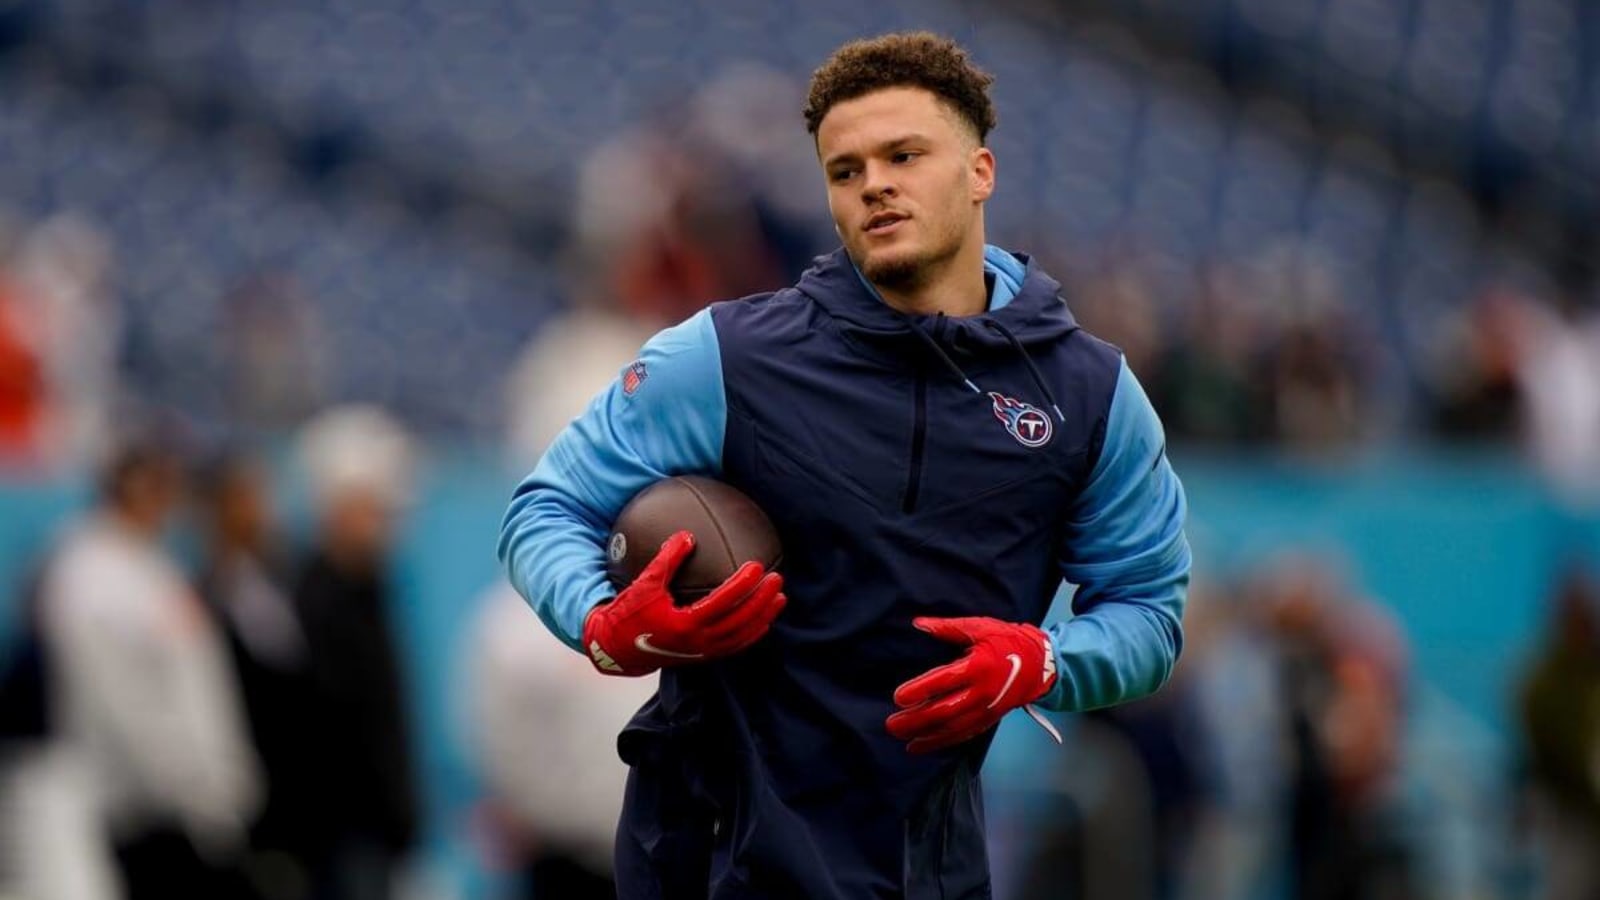 Elijah Molden Could be the Answer to Titans Safety Issues